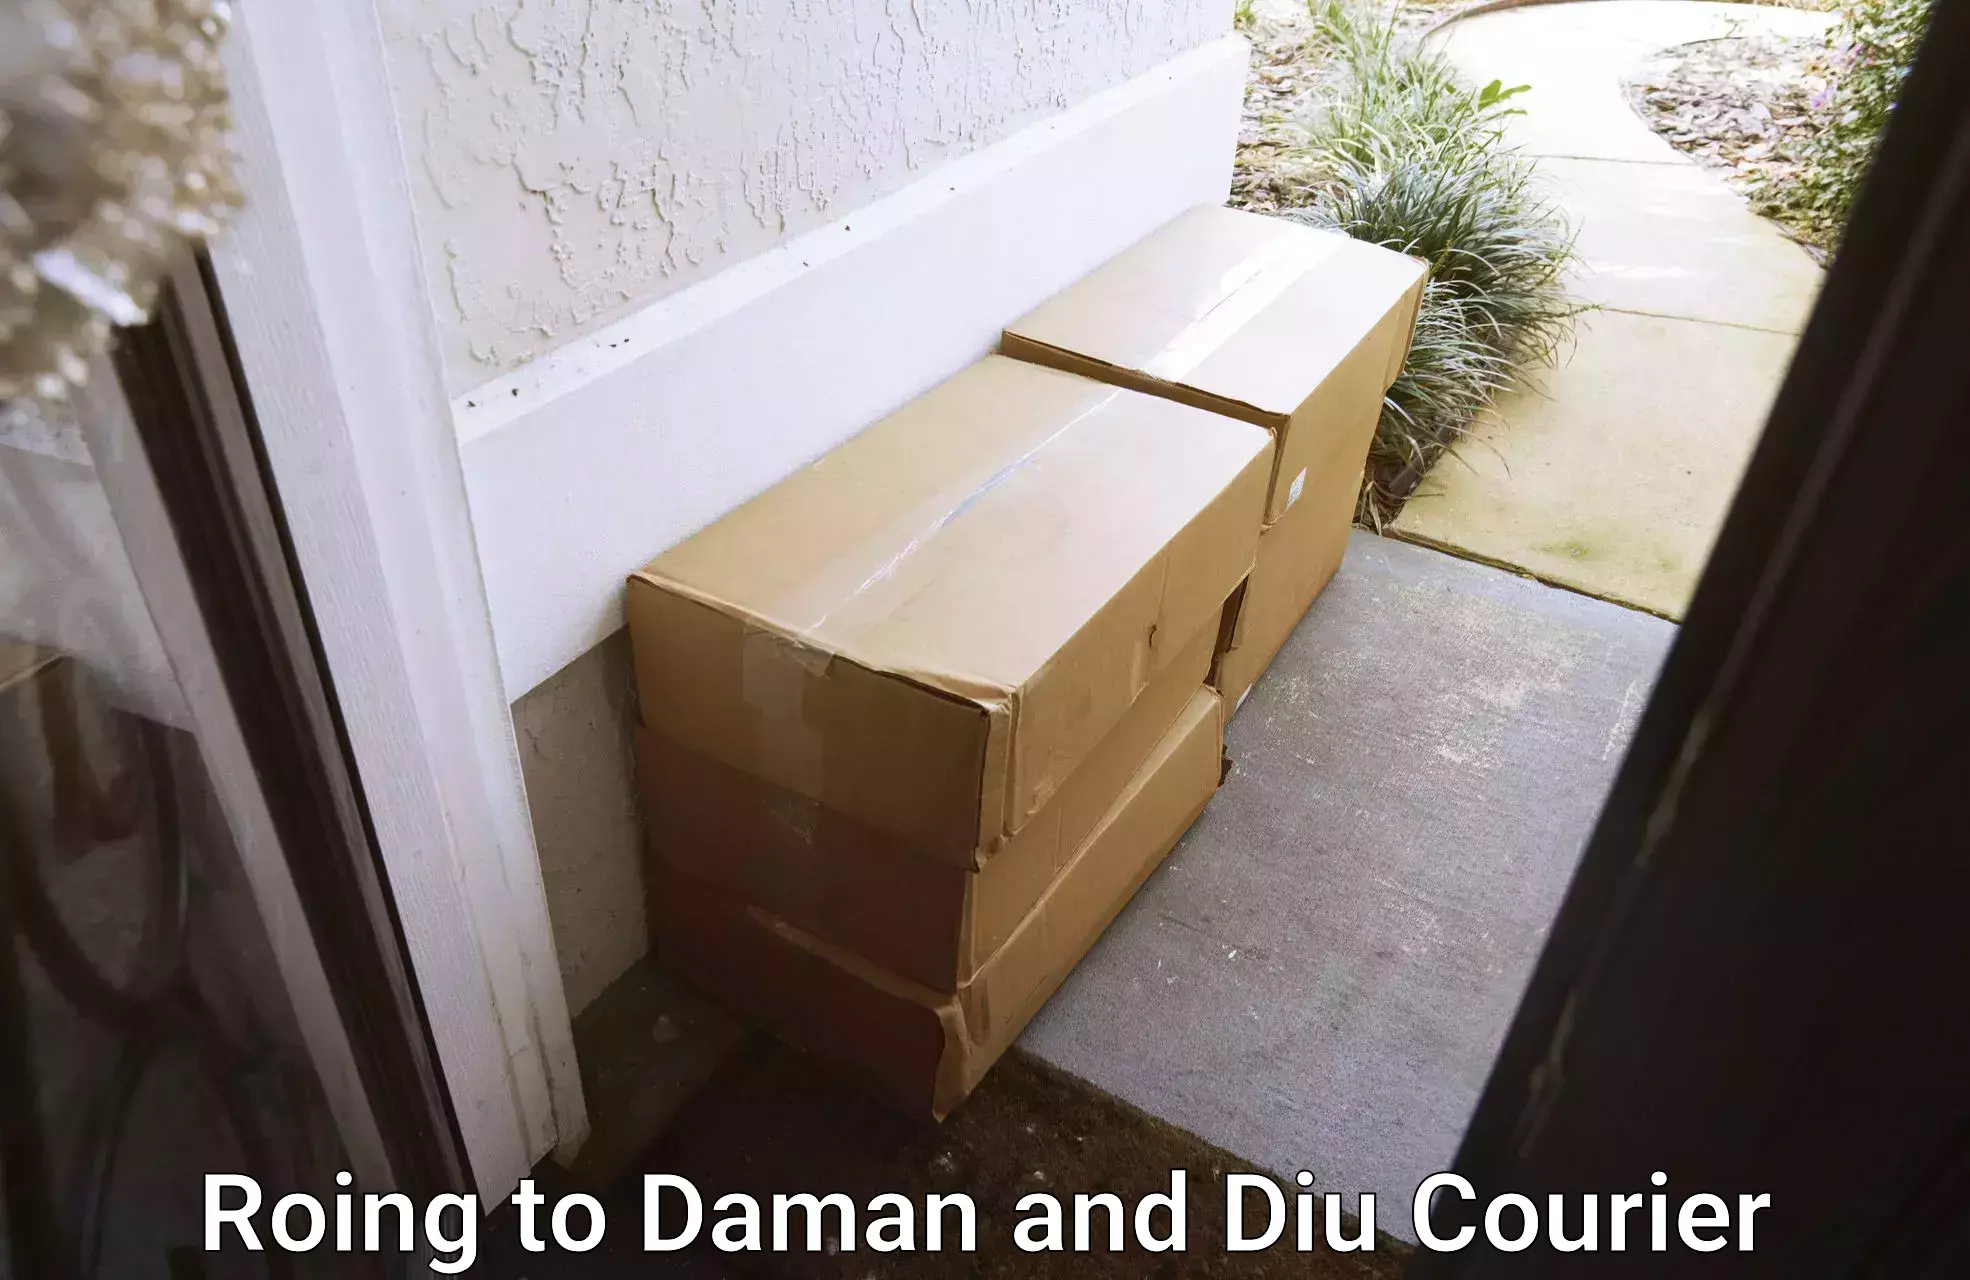 Efficient order fulfillment Roing to Daman and Diu